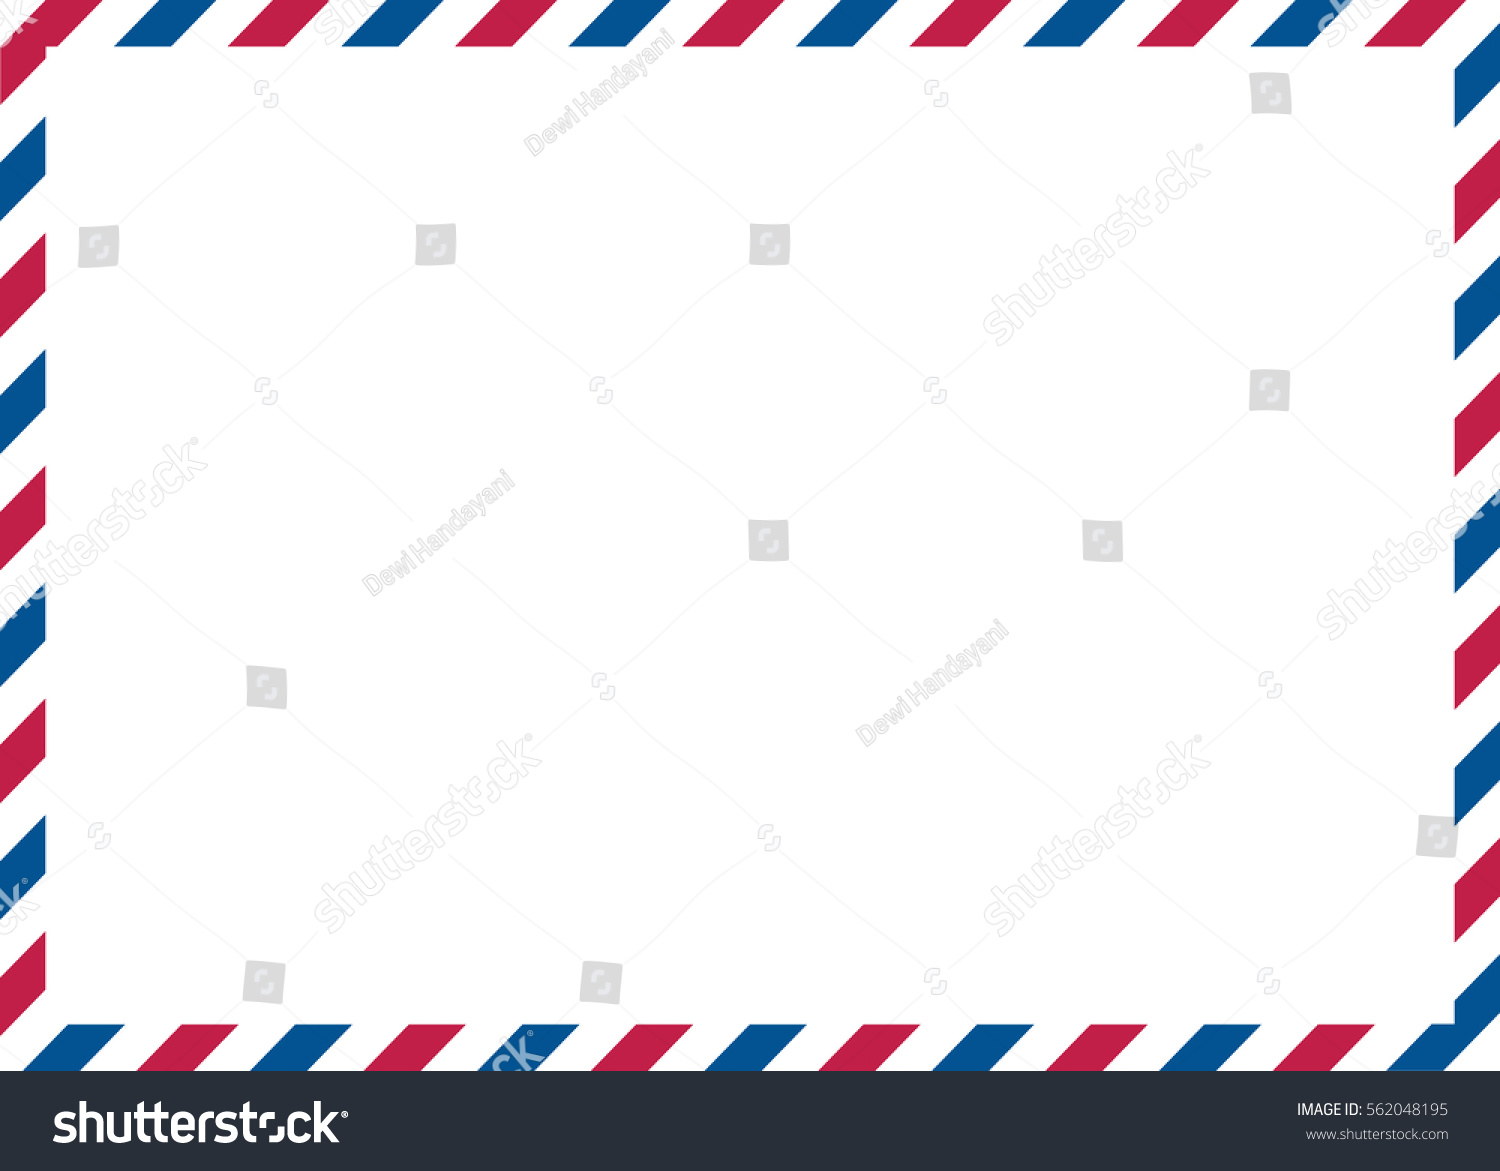 classic envelope border red blue colors stock vector royalty free 562048195 https www shutterstock com image vector classic envelope border red blue colors 562048195